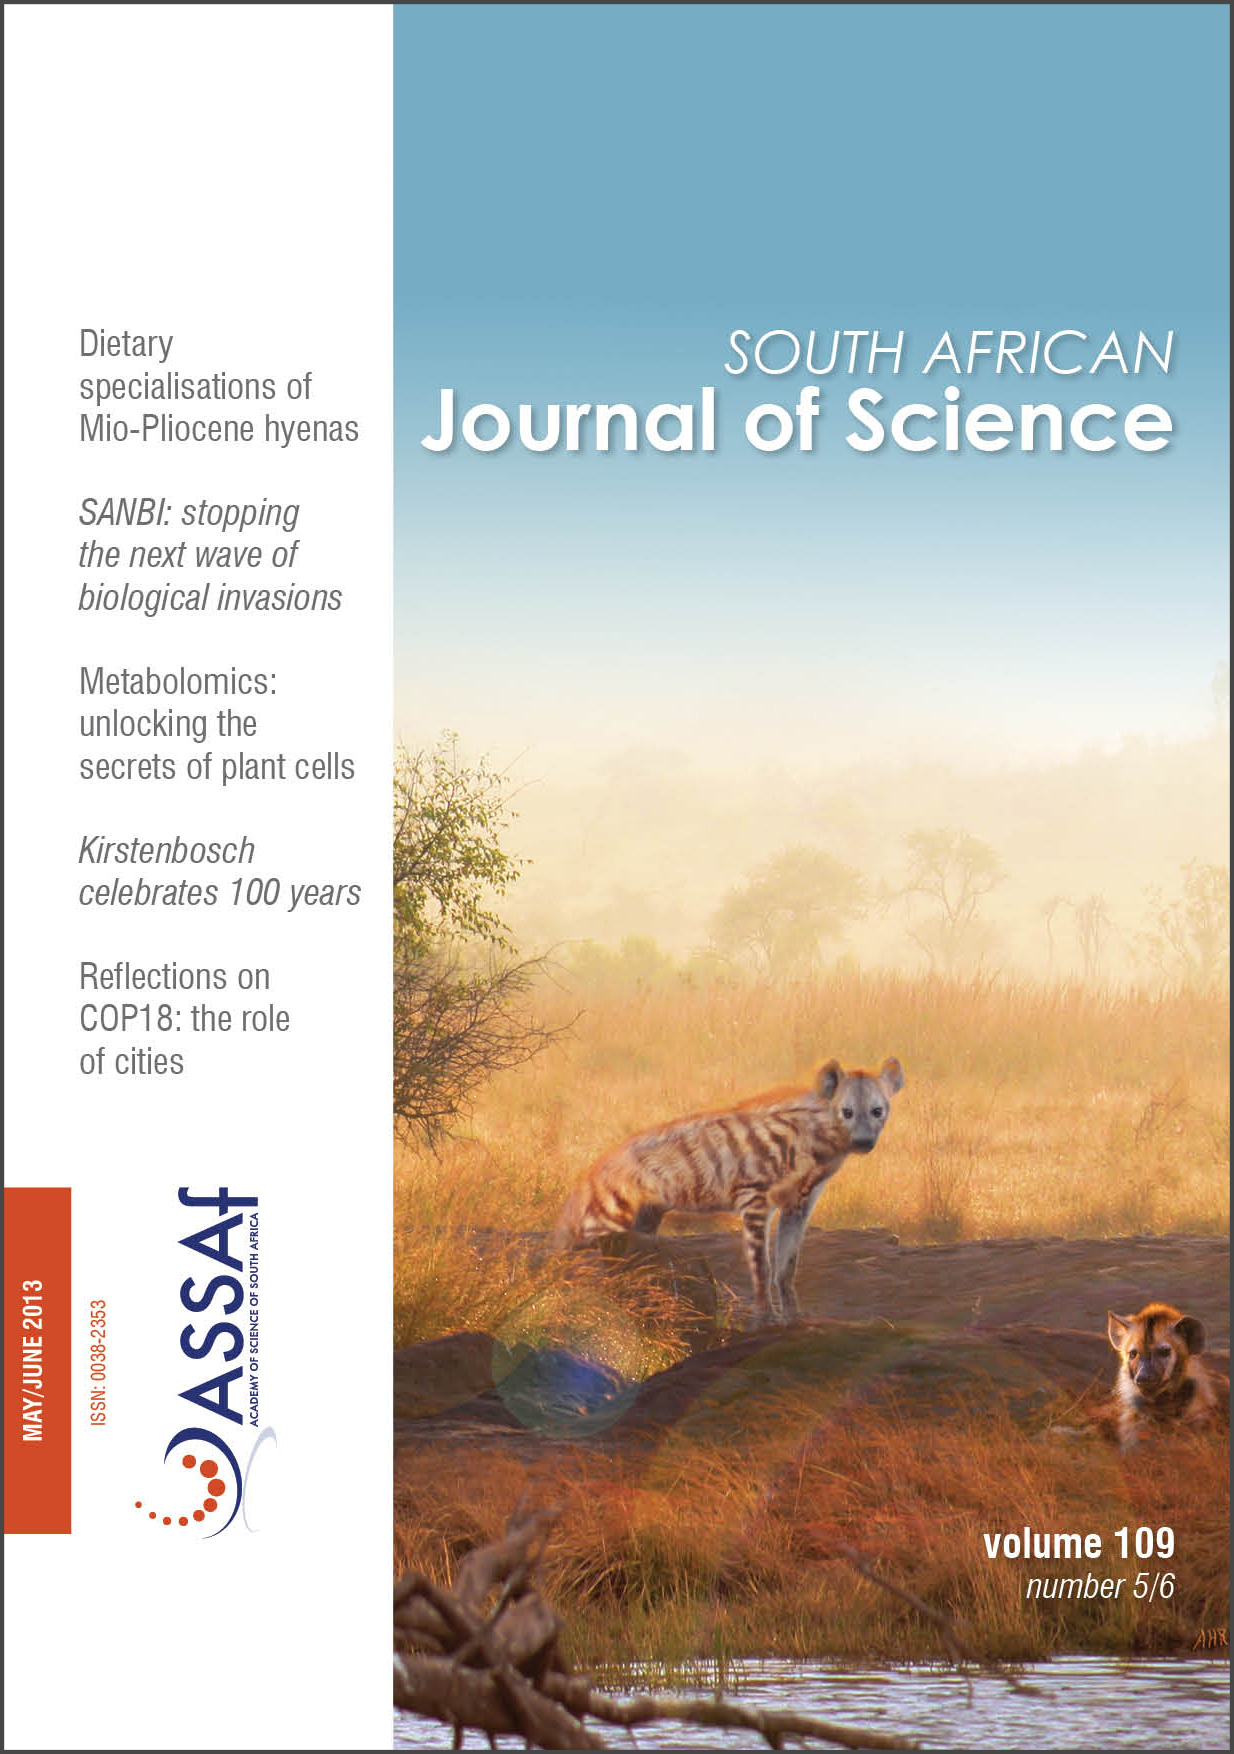 					View Vol. 109 No. 5/6 (2013): South African Journal of Science
				